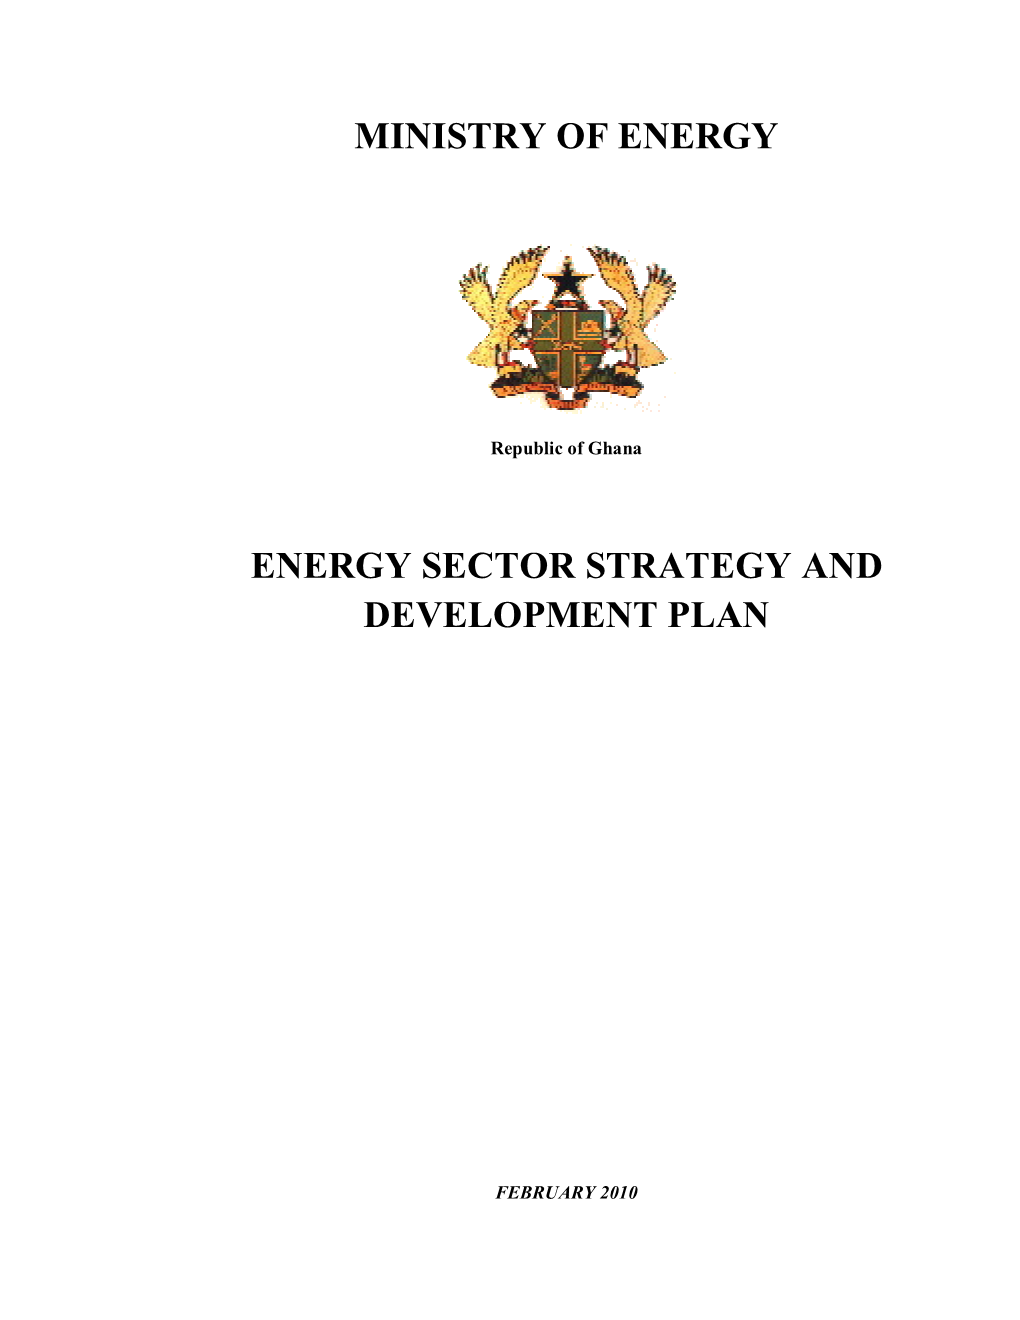 Ministry of Energy Energy Sector Strategy And